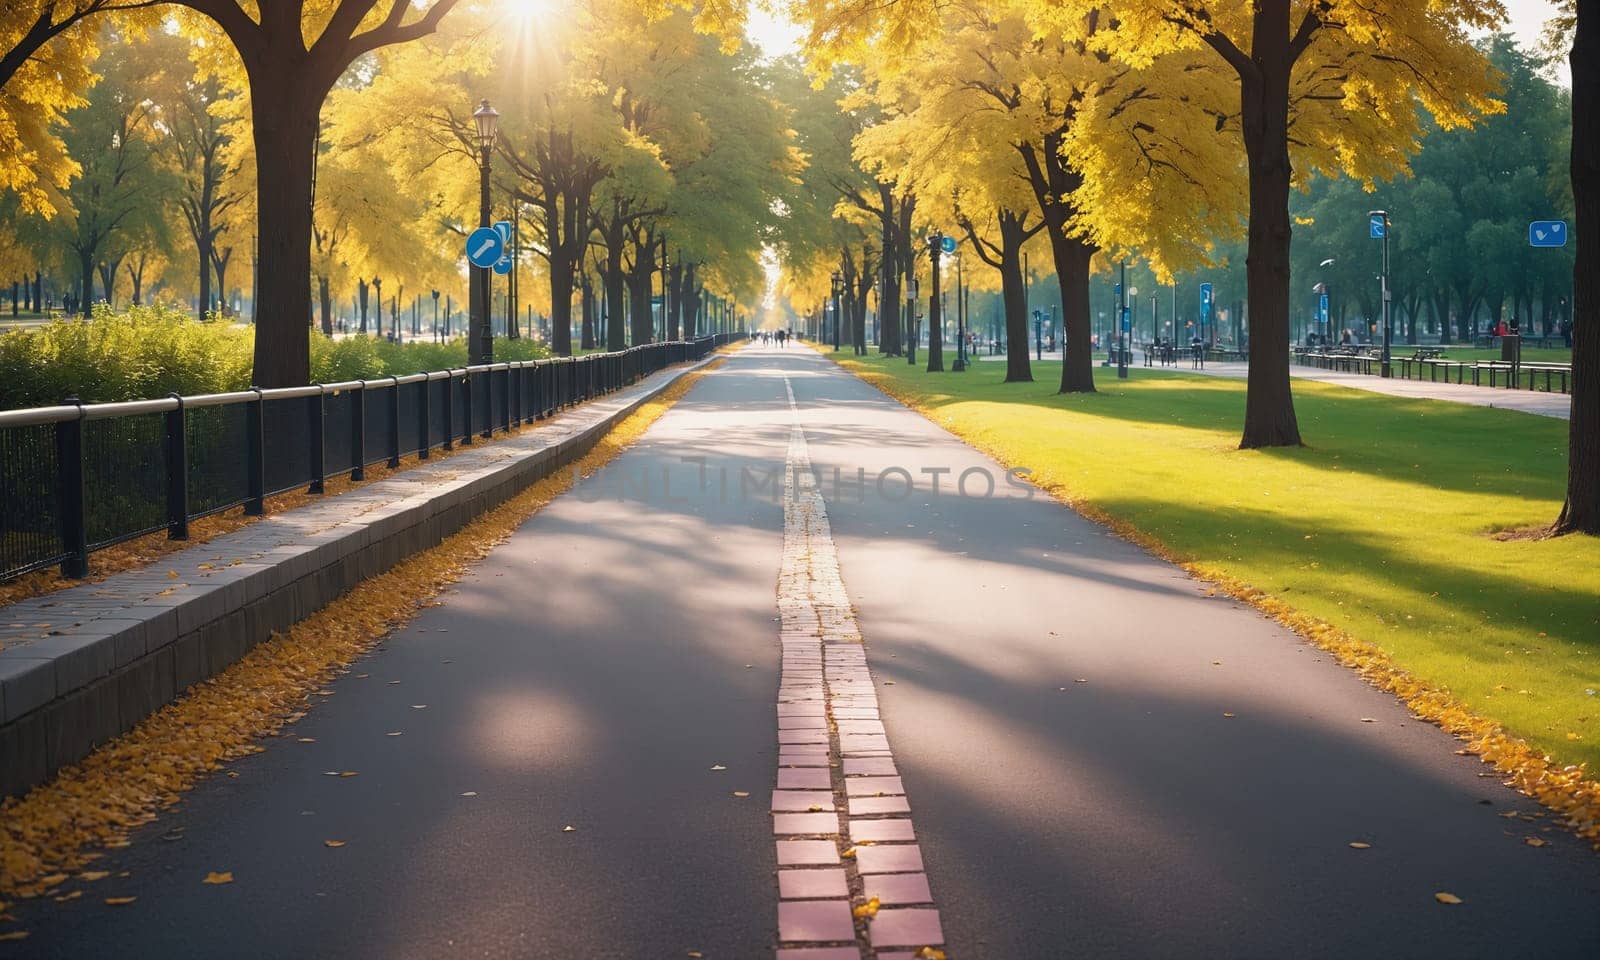 A serene bicycle path adorned with autumnal trees basks in the morning sunlight offering a tranquil city escape.